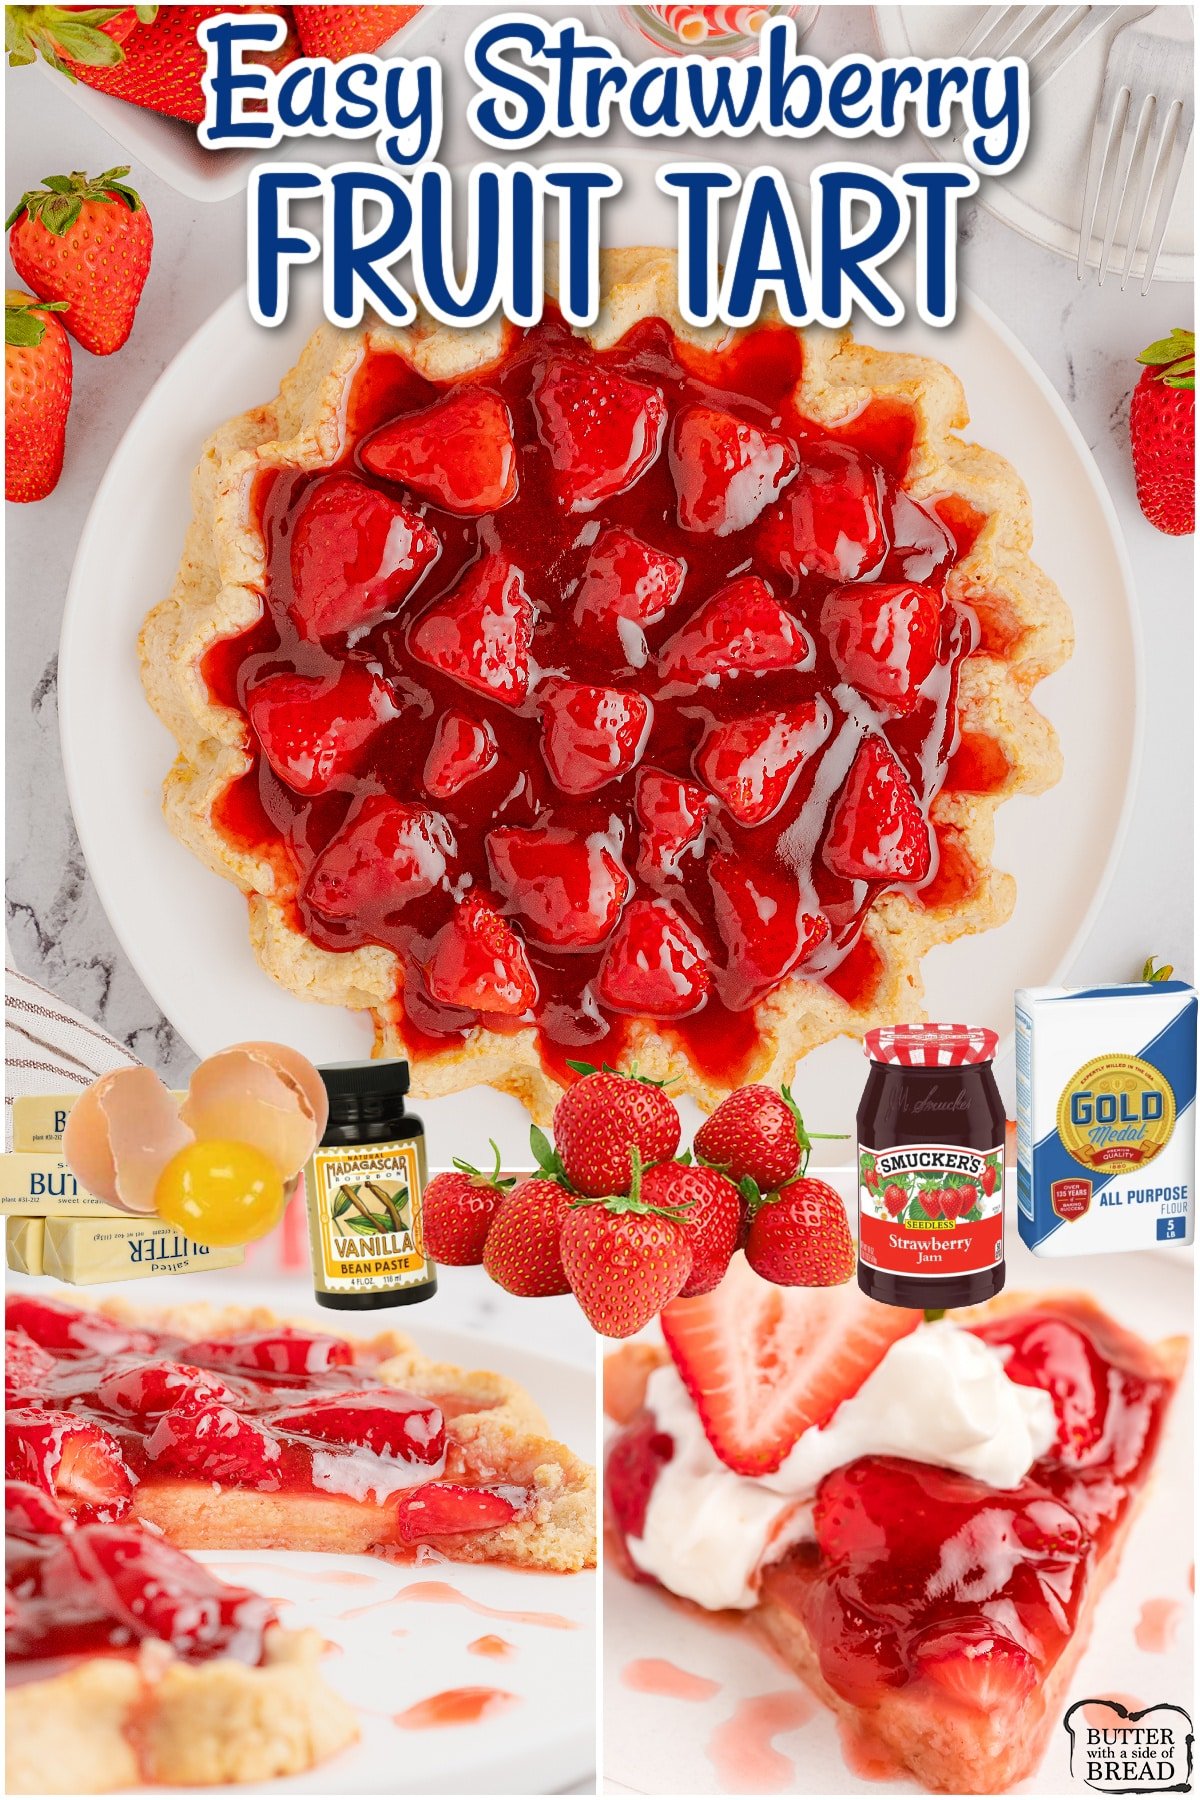 Glazed Strawberry Tart made by topping homemade tart crust with a mixture of jam and fresh strawberries. Lovely tart recipe that's easy to make! 